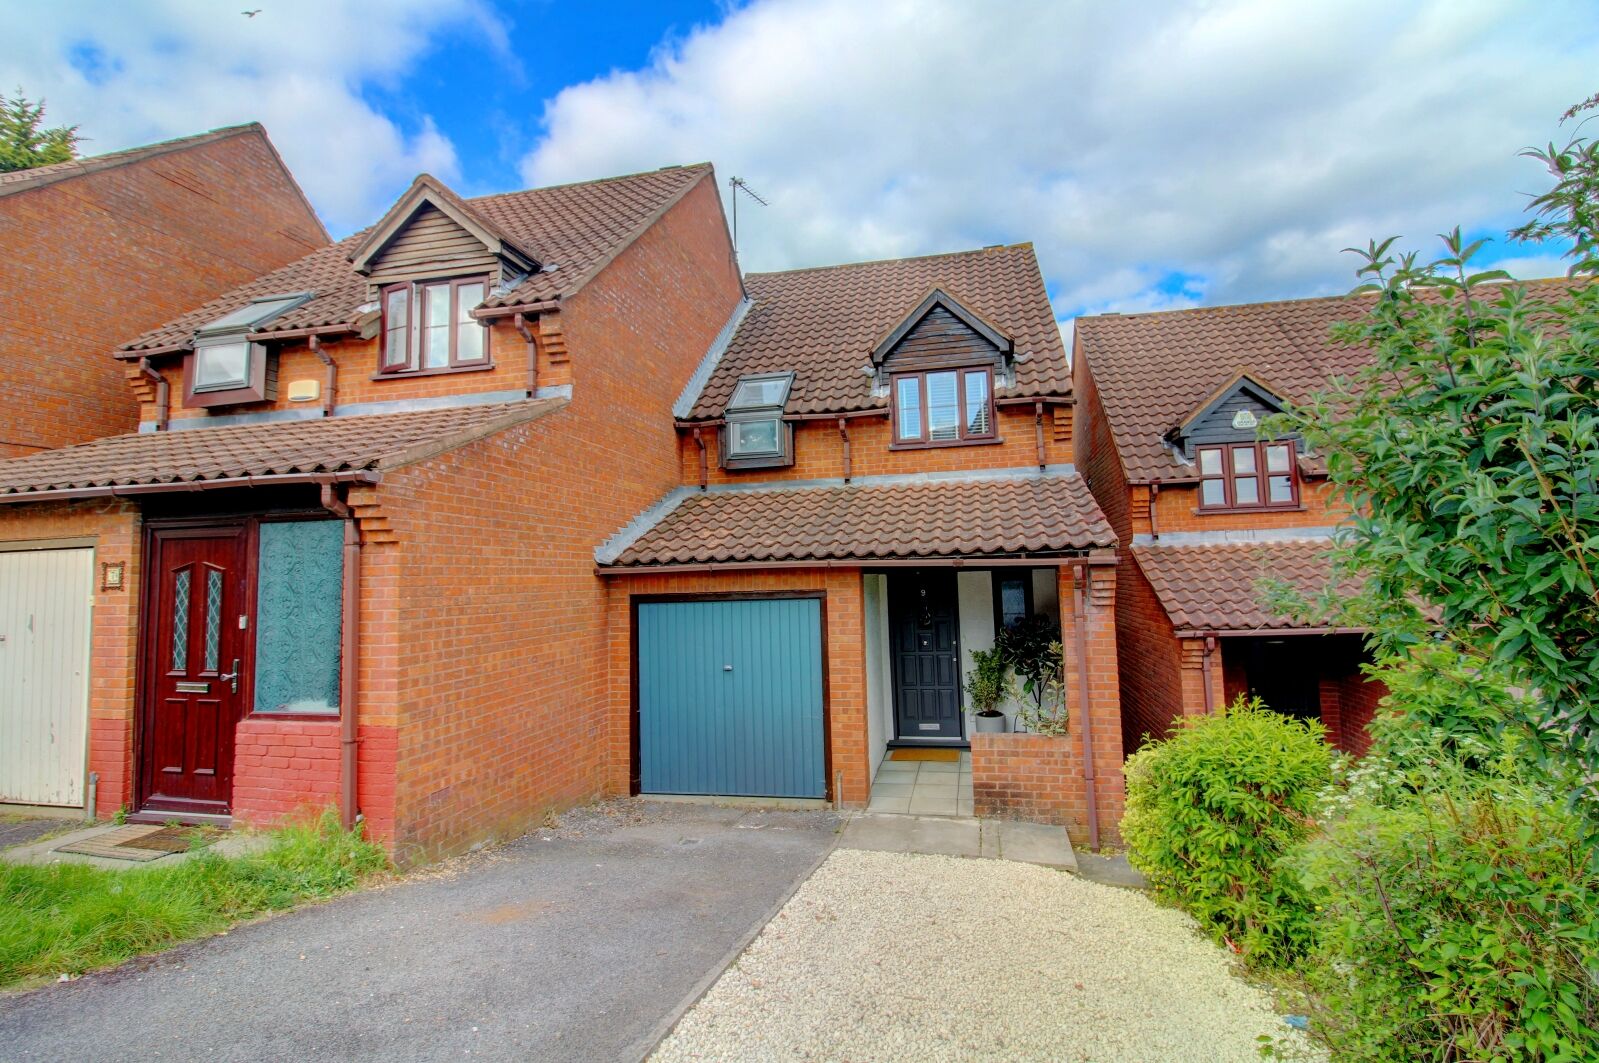 3 bedroom semi detached house for sale Garratts Way, High Wycombe, HP13, main image